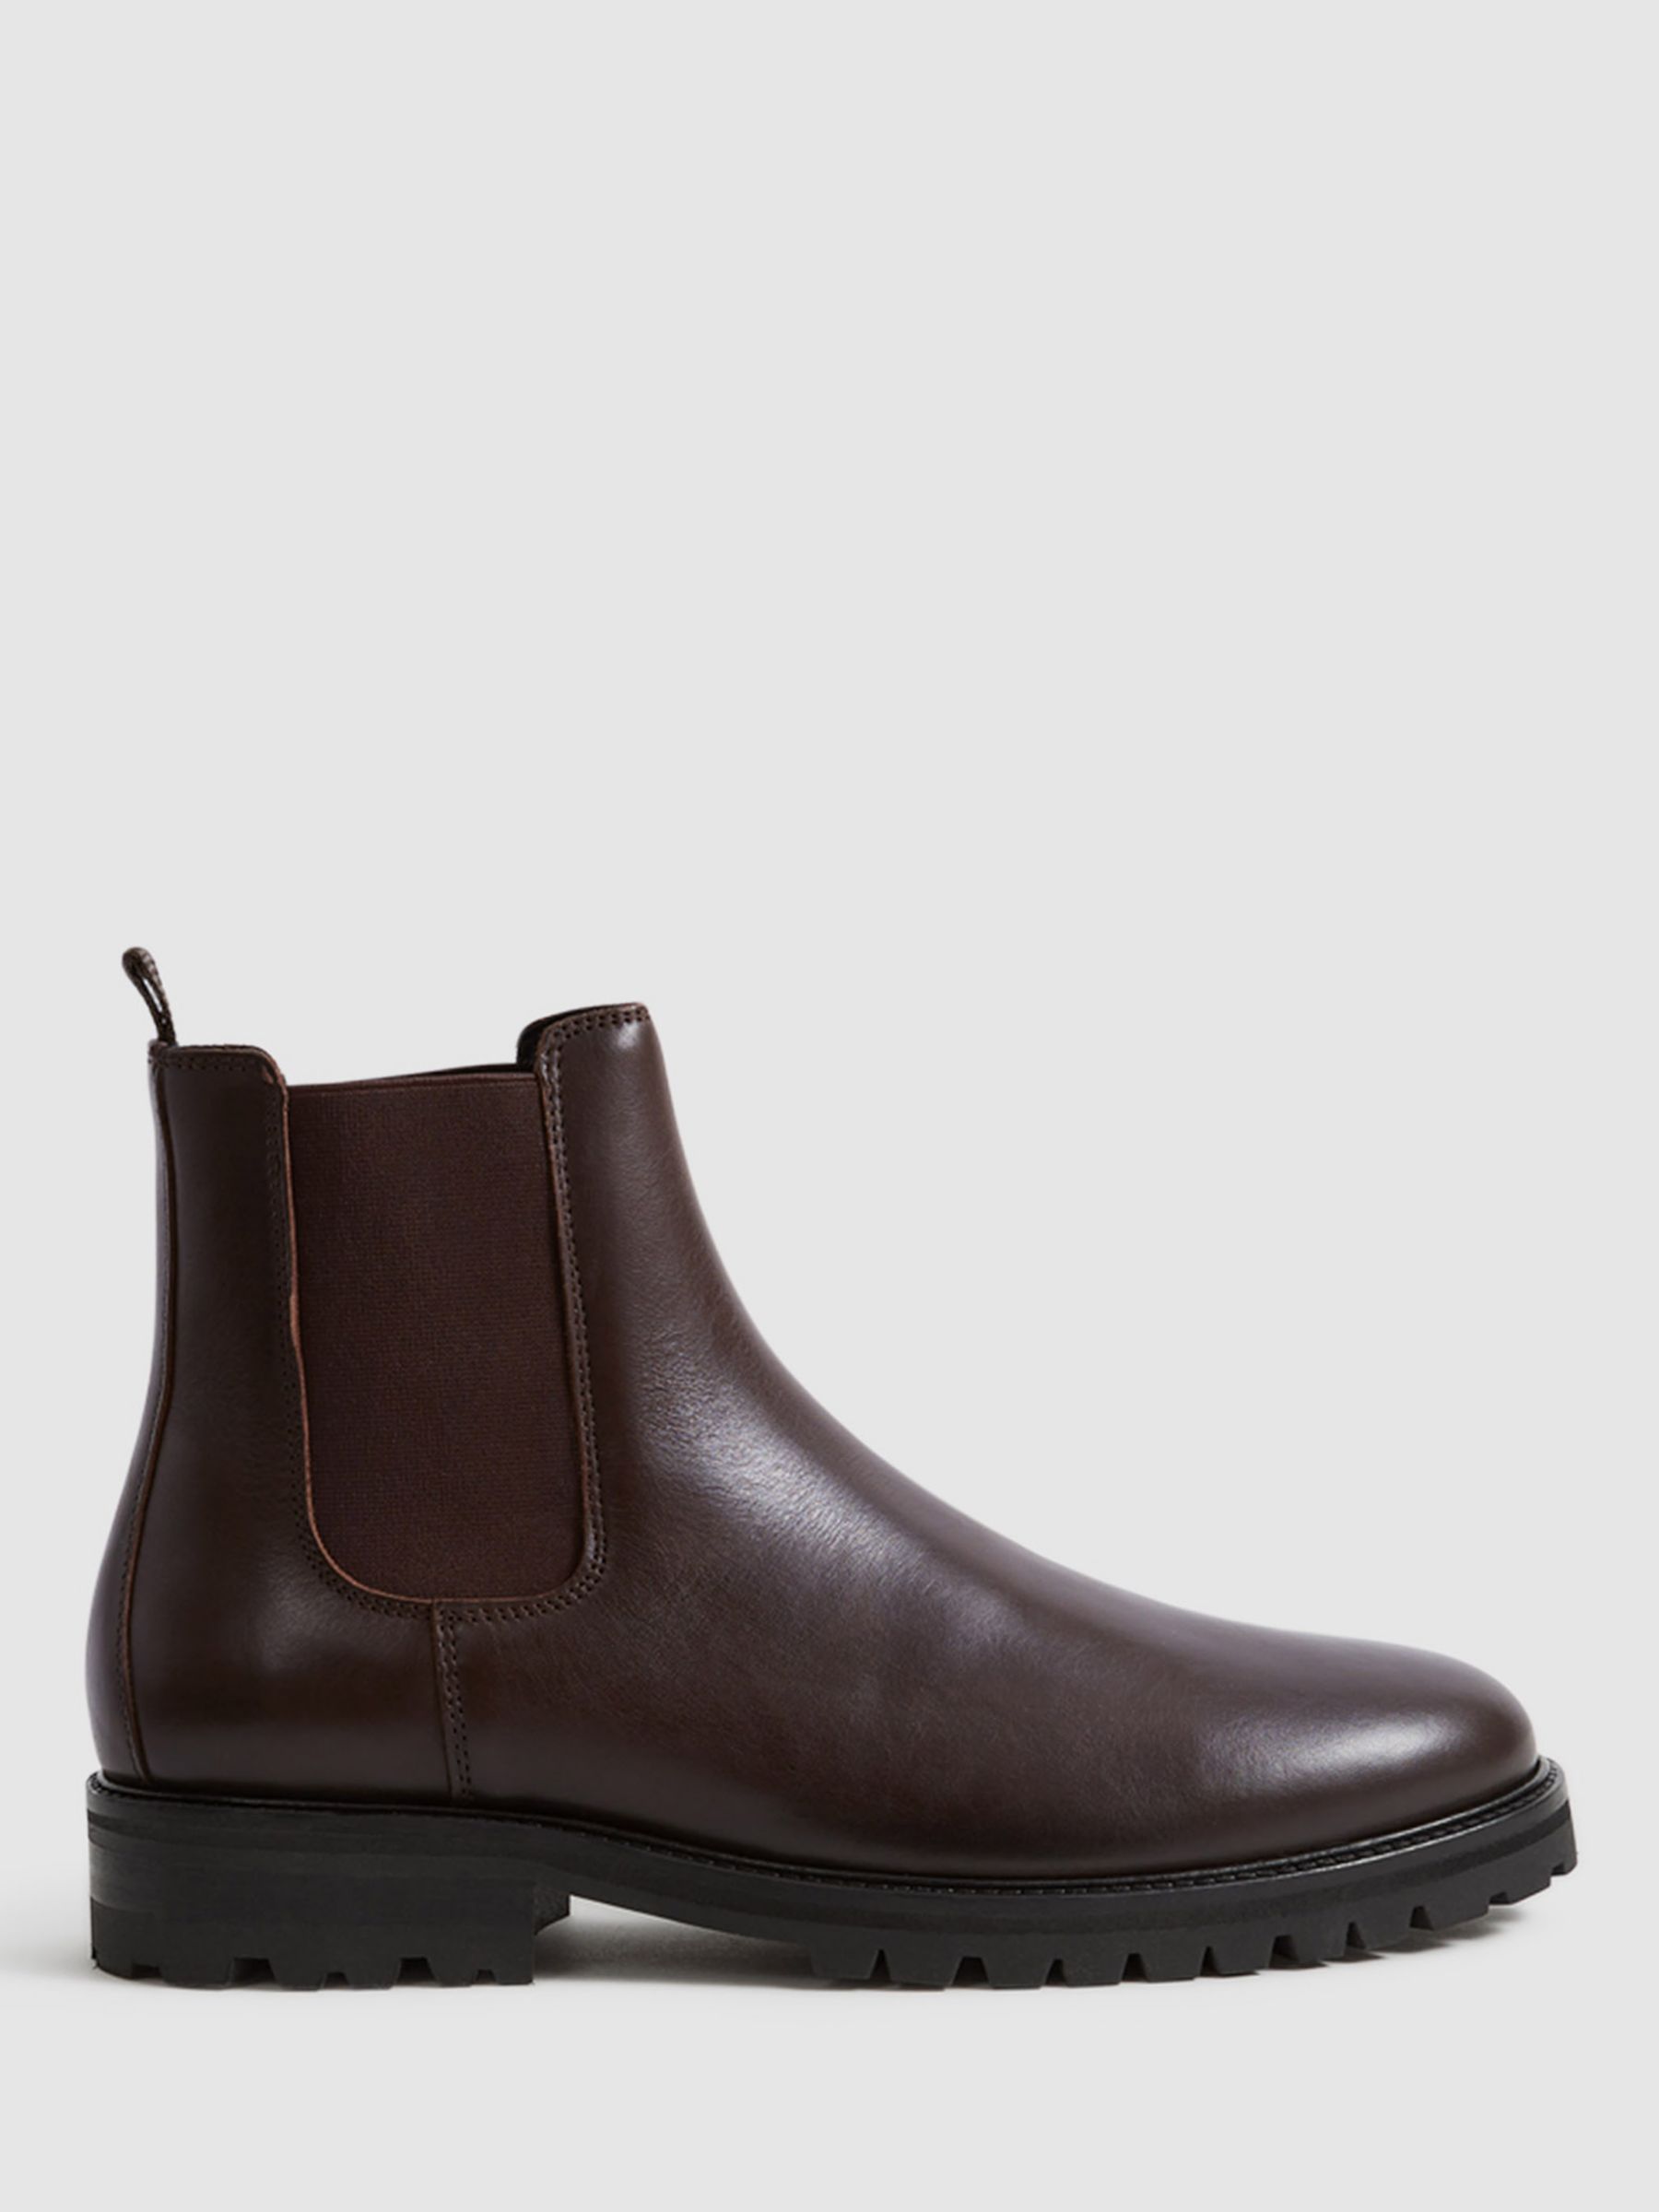 Reiss Chiltern Chelsea Boots, Chocolate, 8